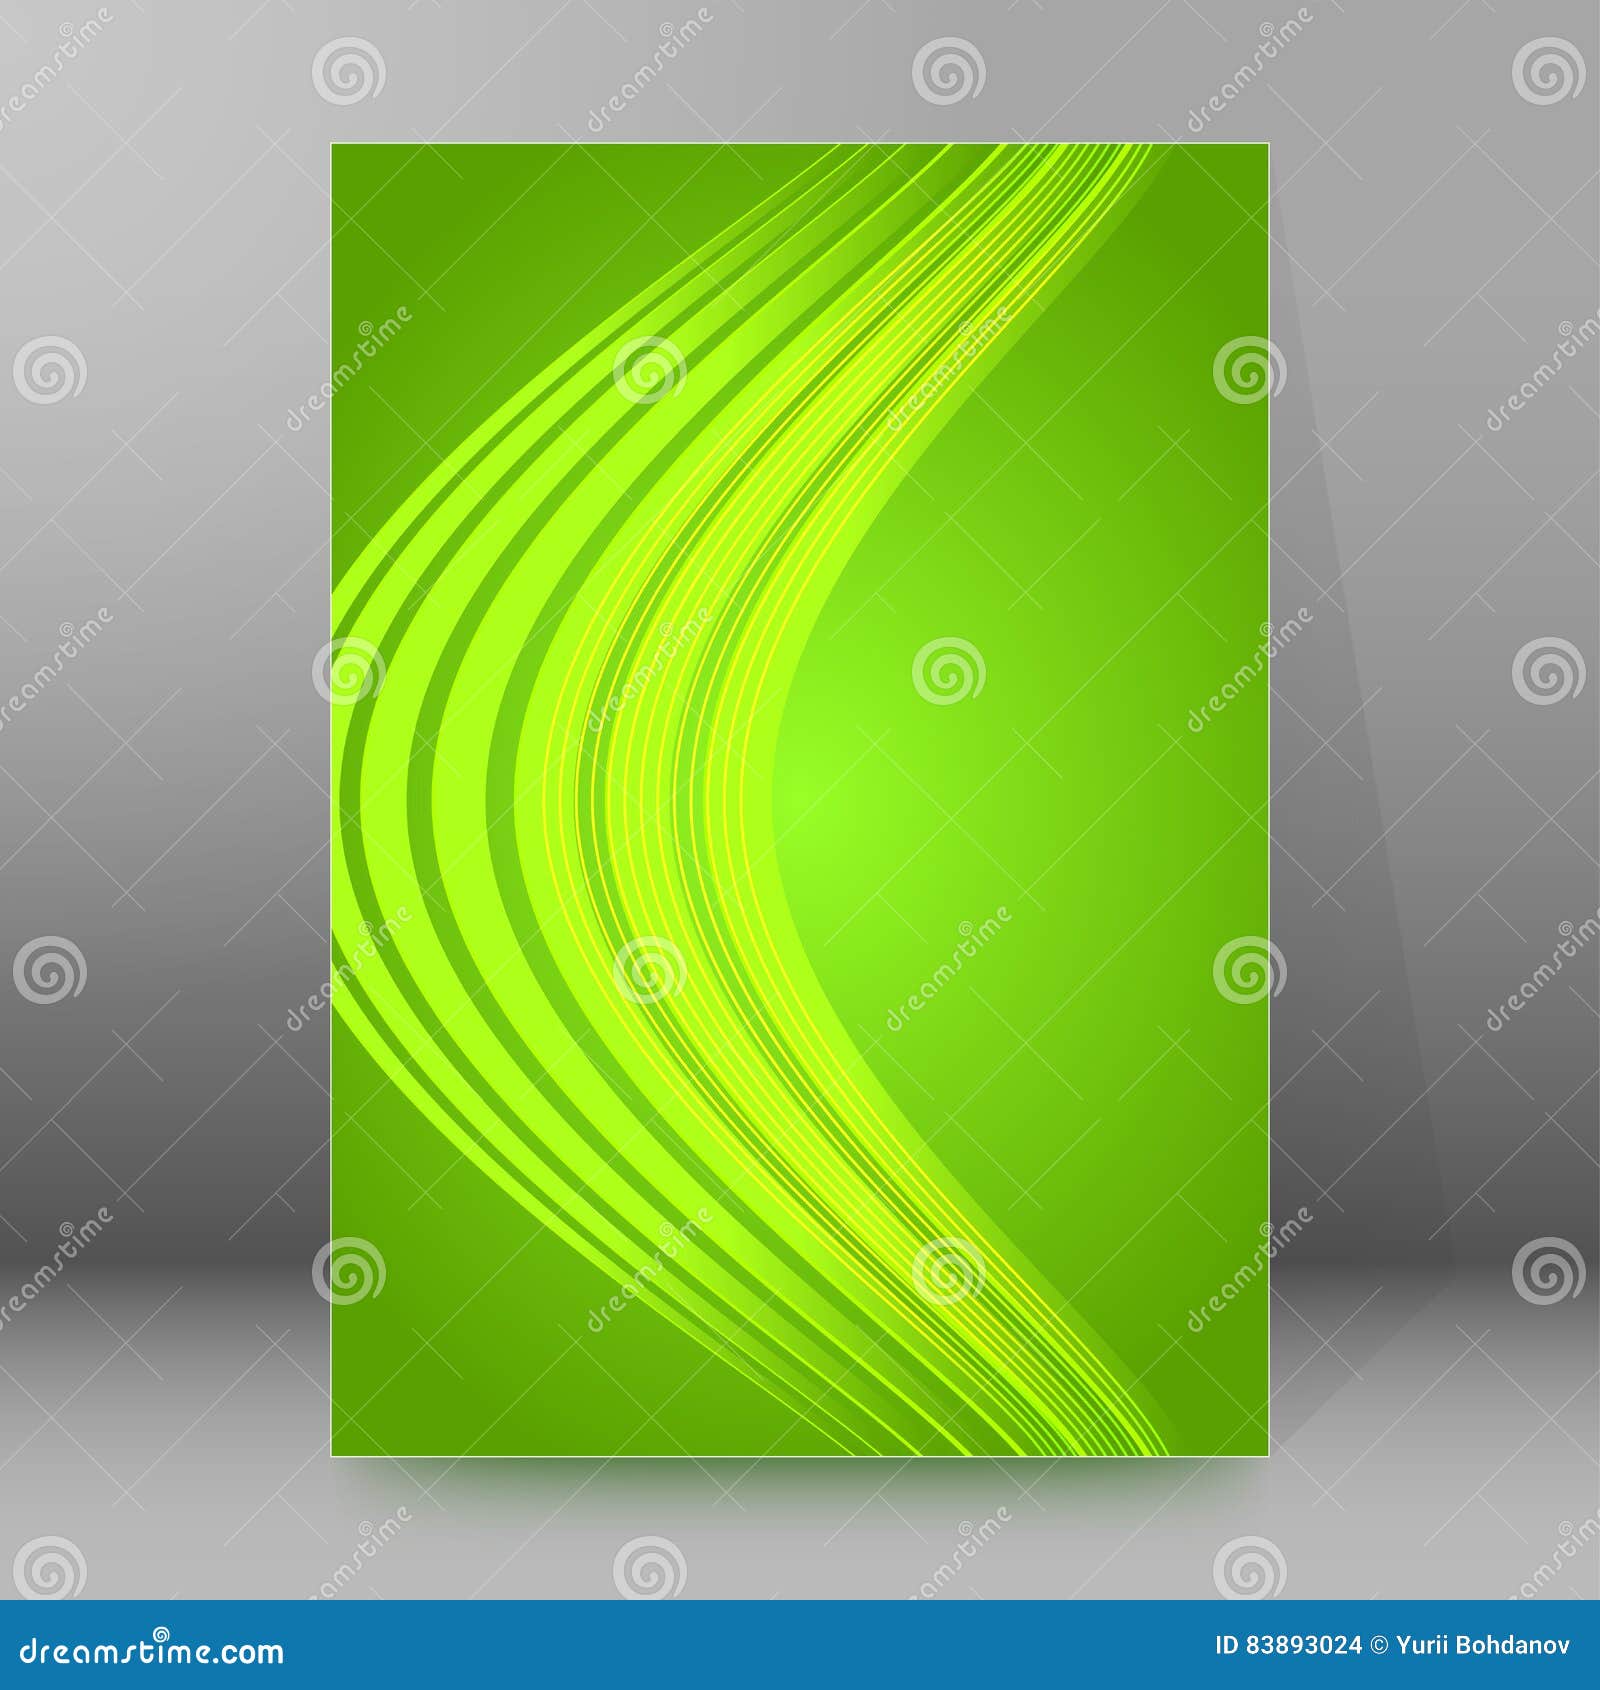 Background Report Brochure Cover Pages A4 Style Abstract Glow02 Stock  Vector - Illustration of booklet, ecology: 83893024